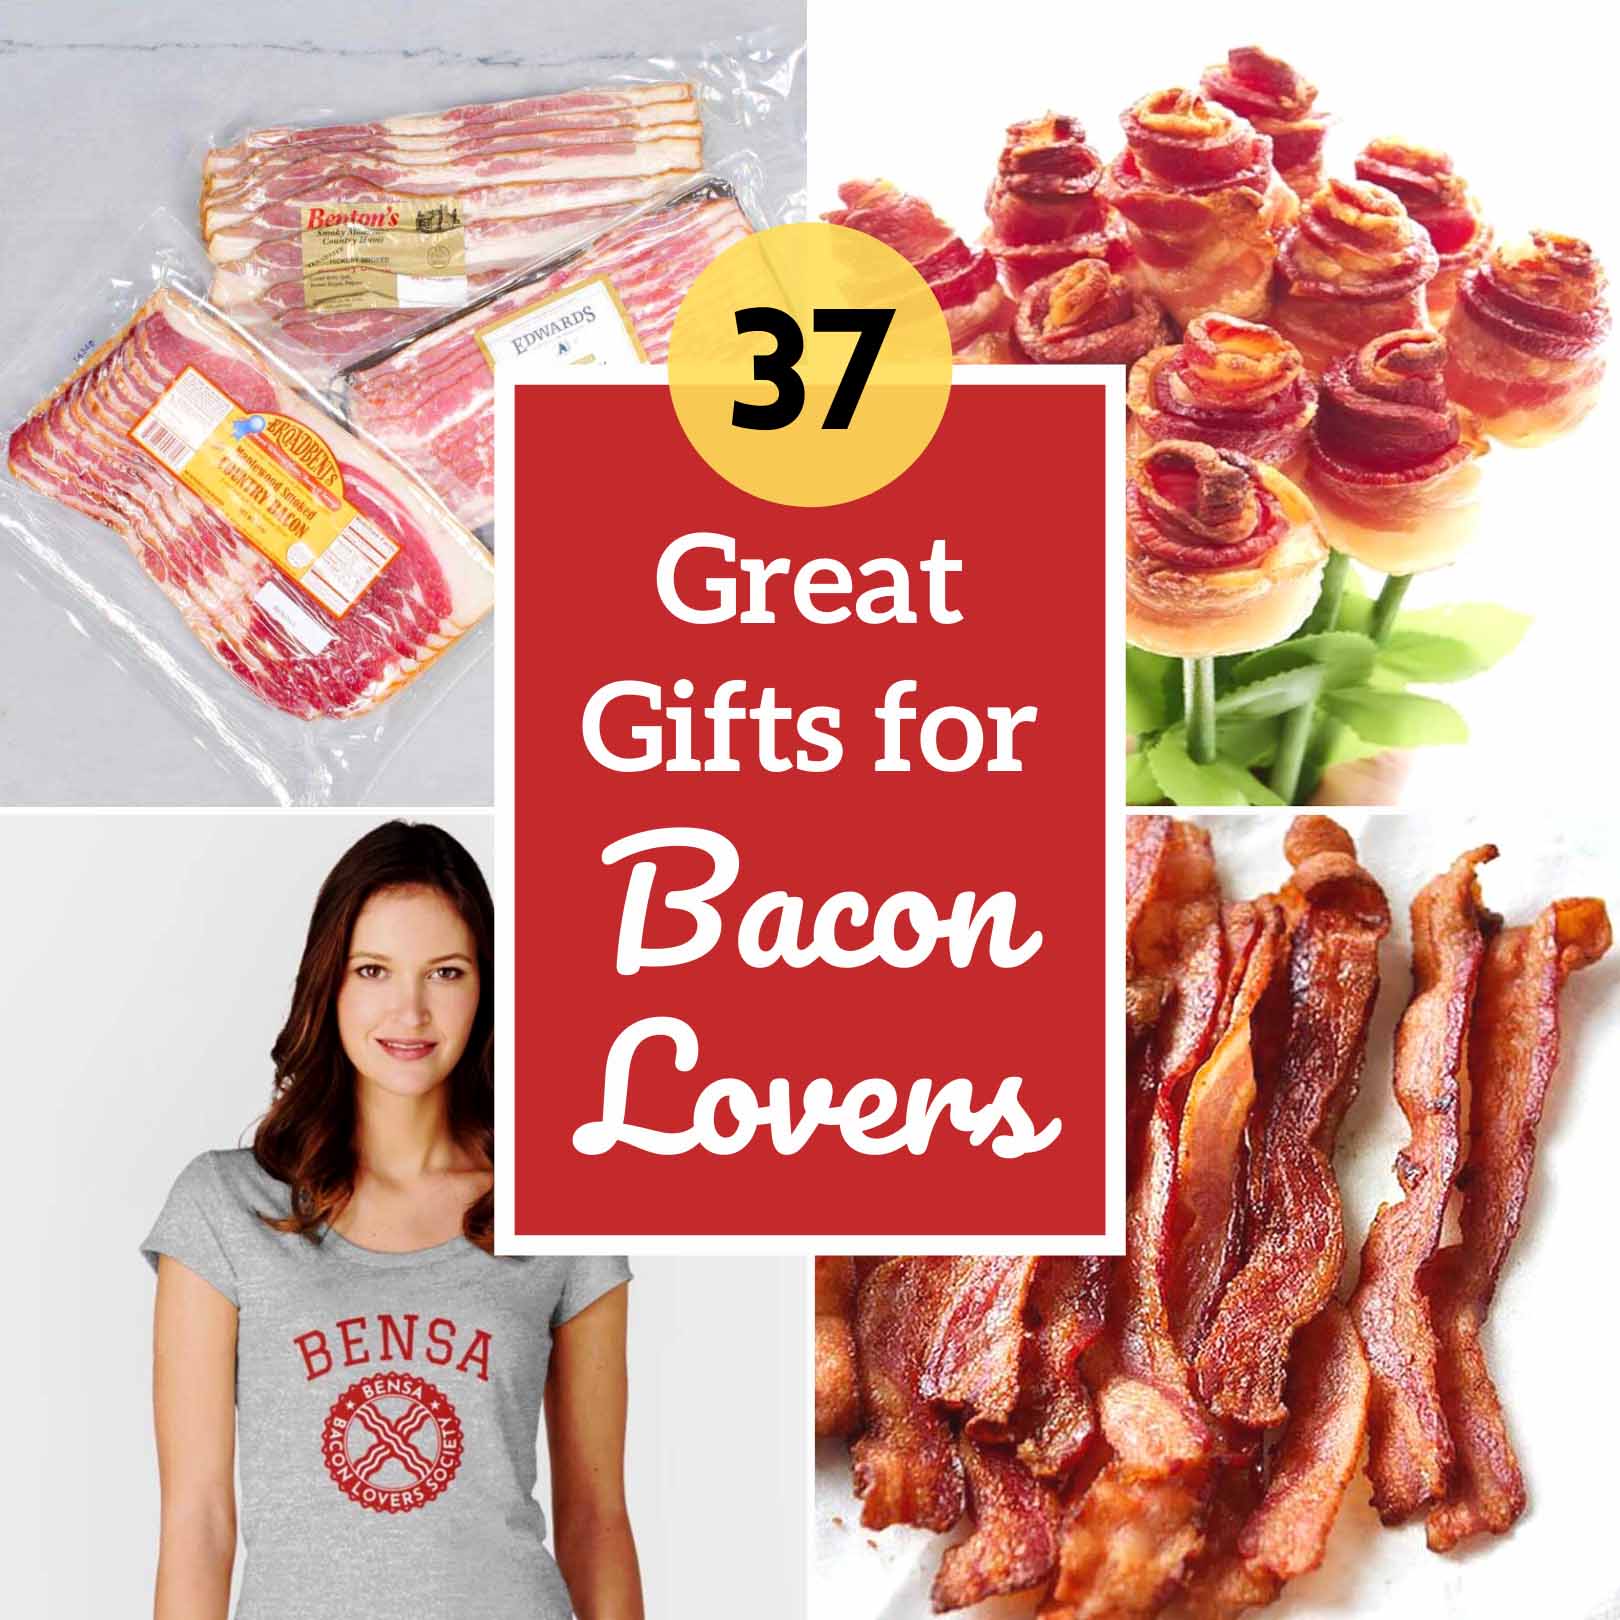 A package of gourmet bacon, bacon roses, apple pie flavored bacon, and a woman in a bacon shirt.